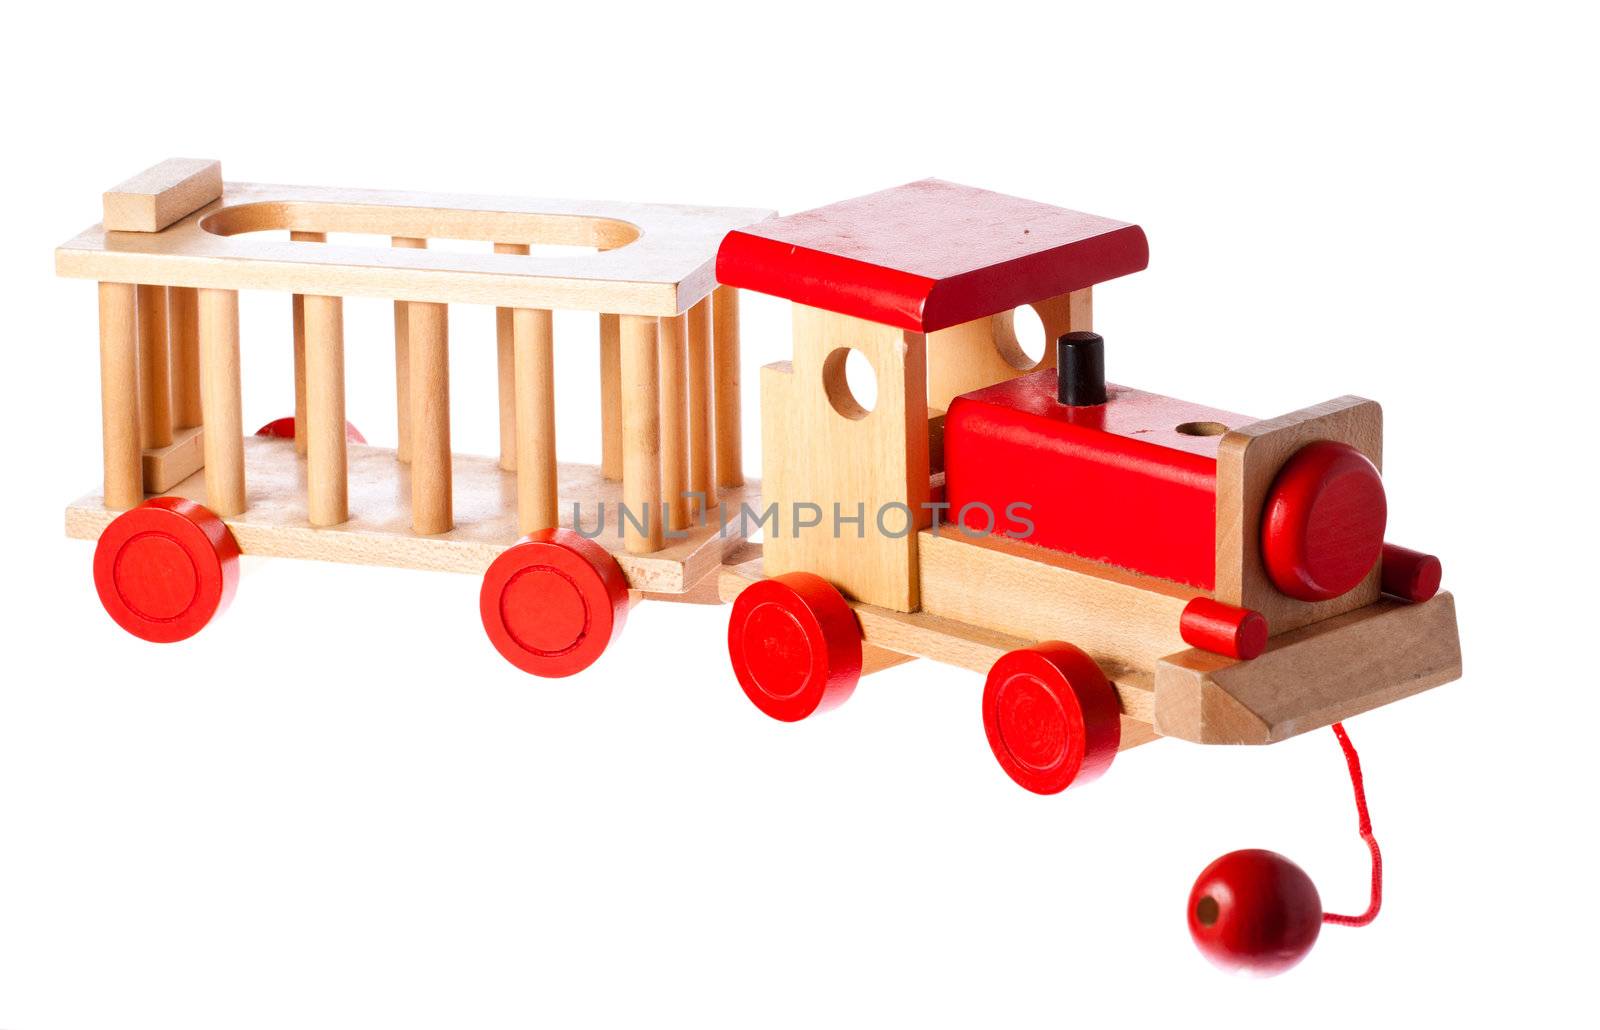 A funky old retro wooden train. Isolated over white with clipping path.